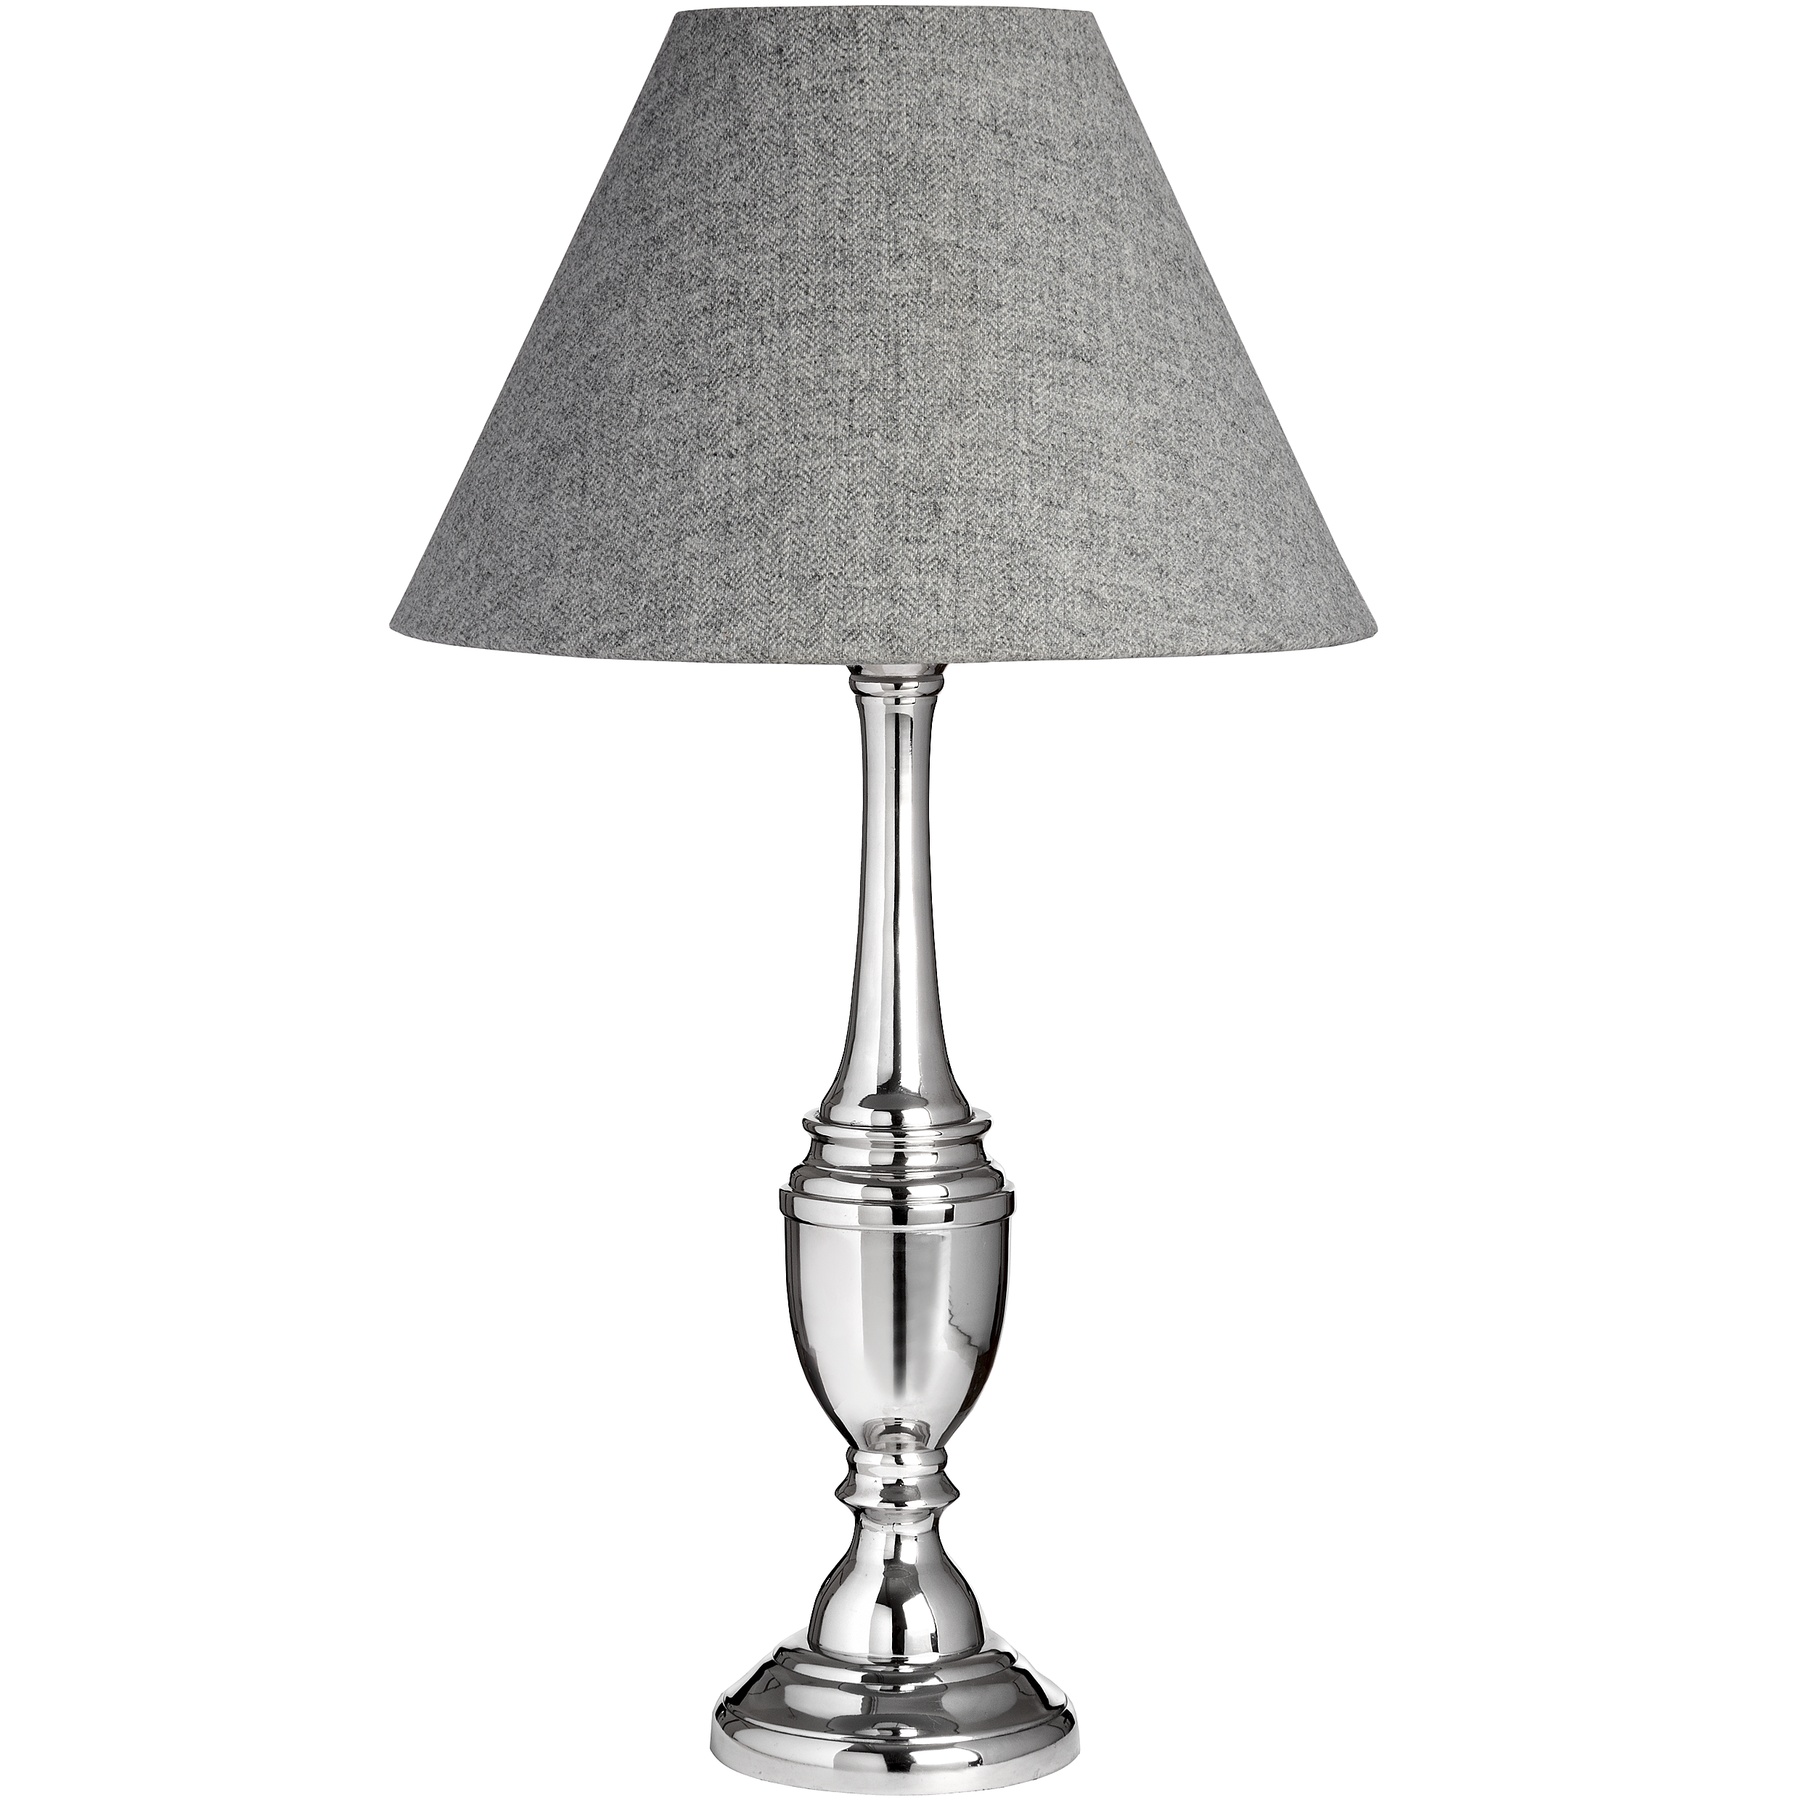 Rosedale Table Lamp – Base only